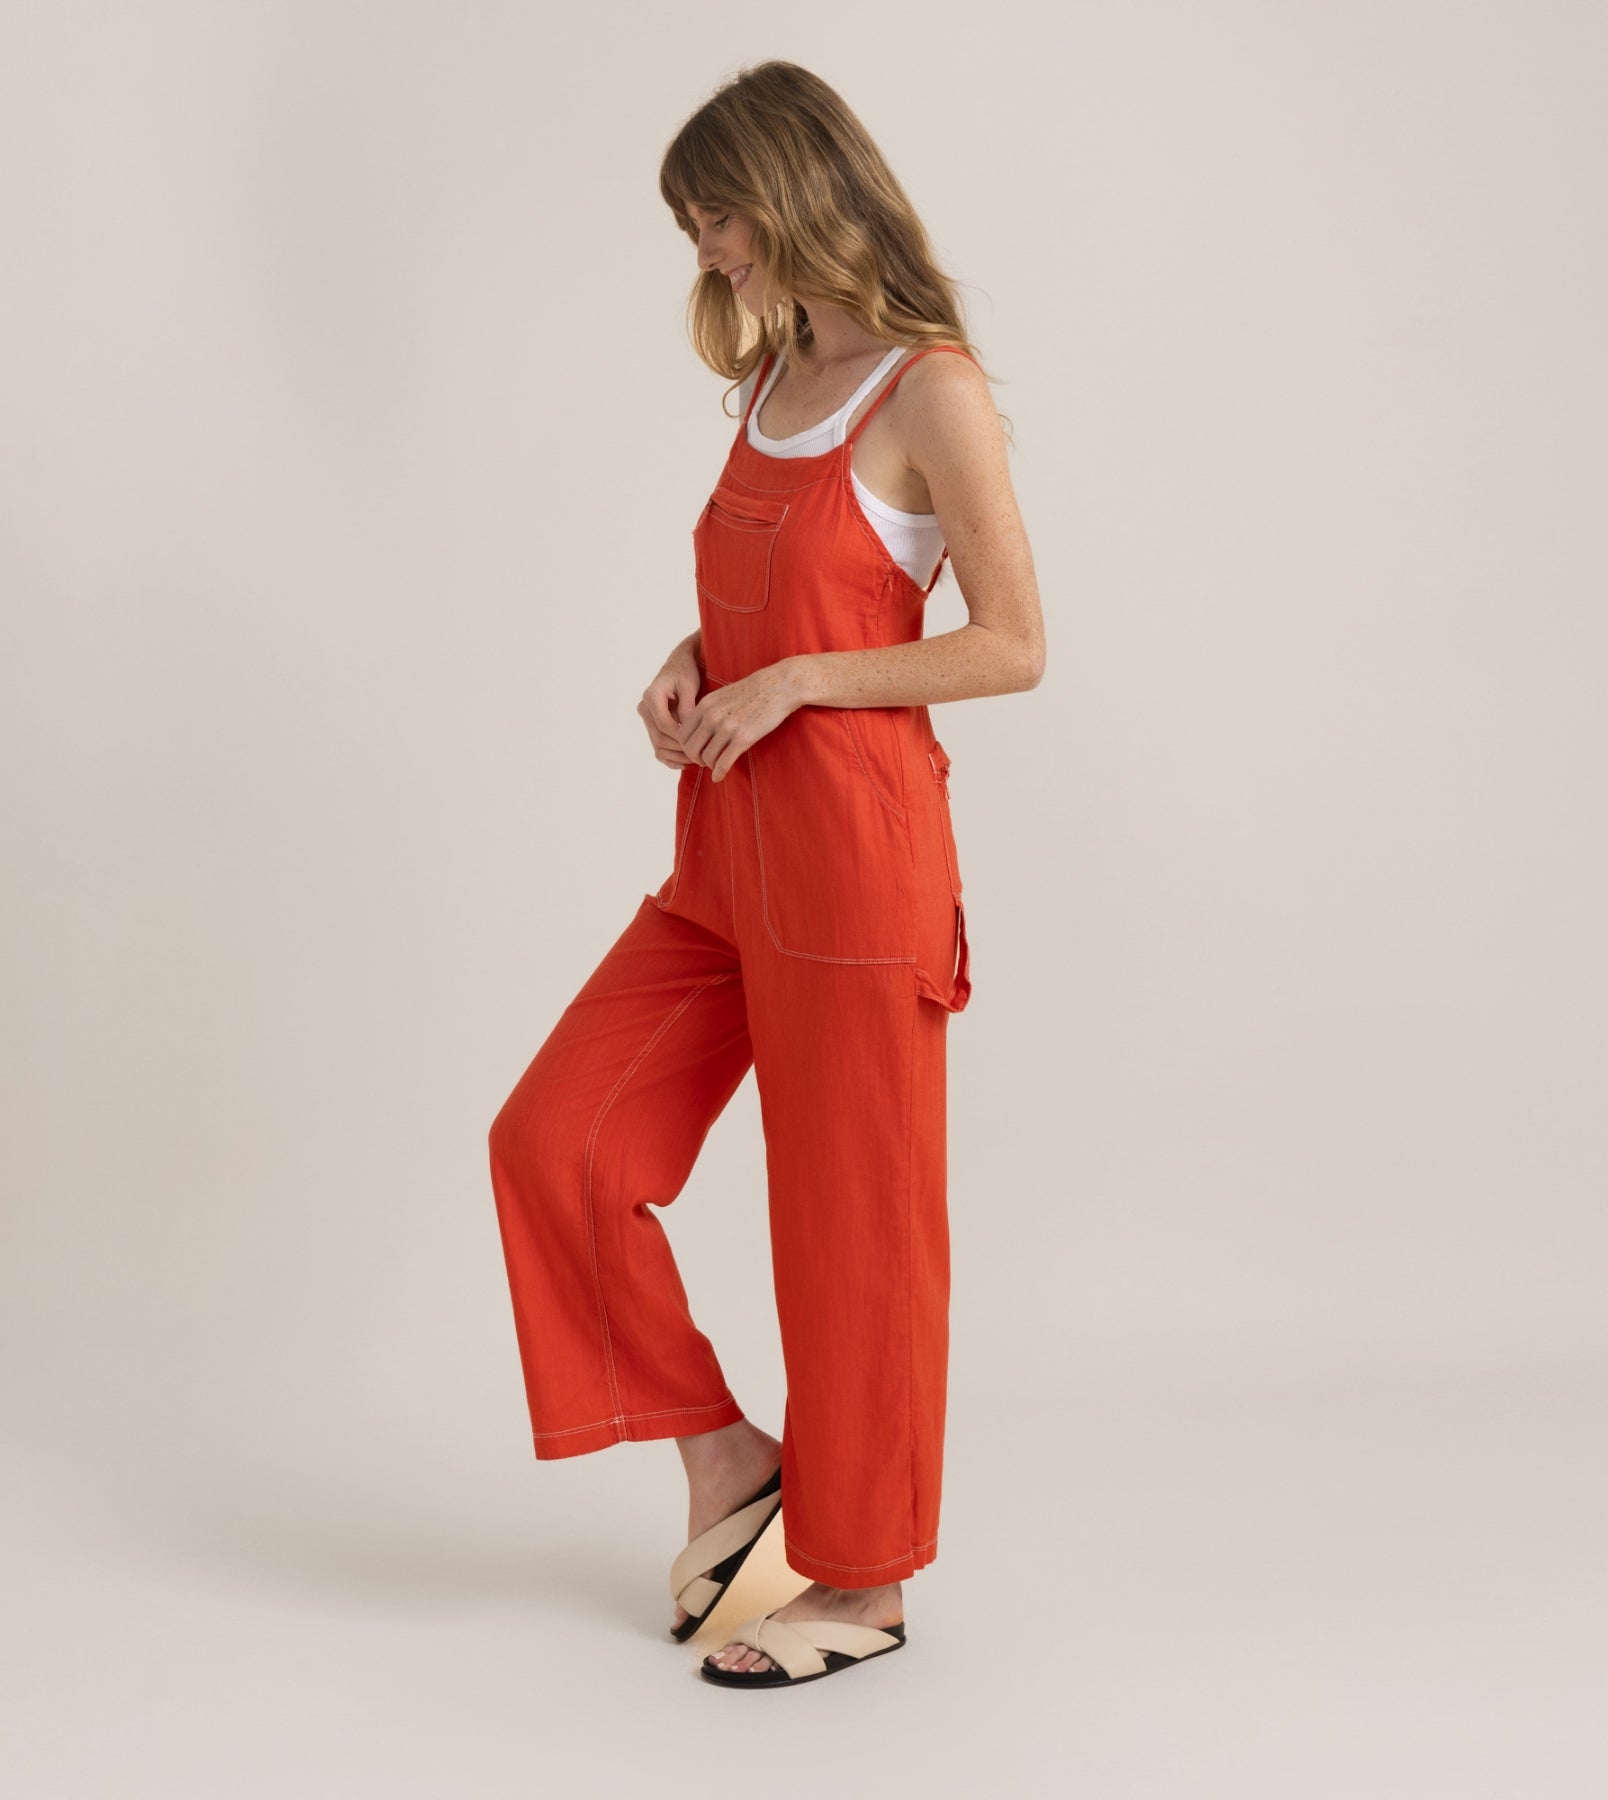 Daytrip Overall Jumpsuit